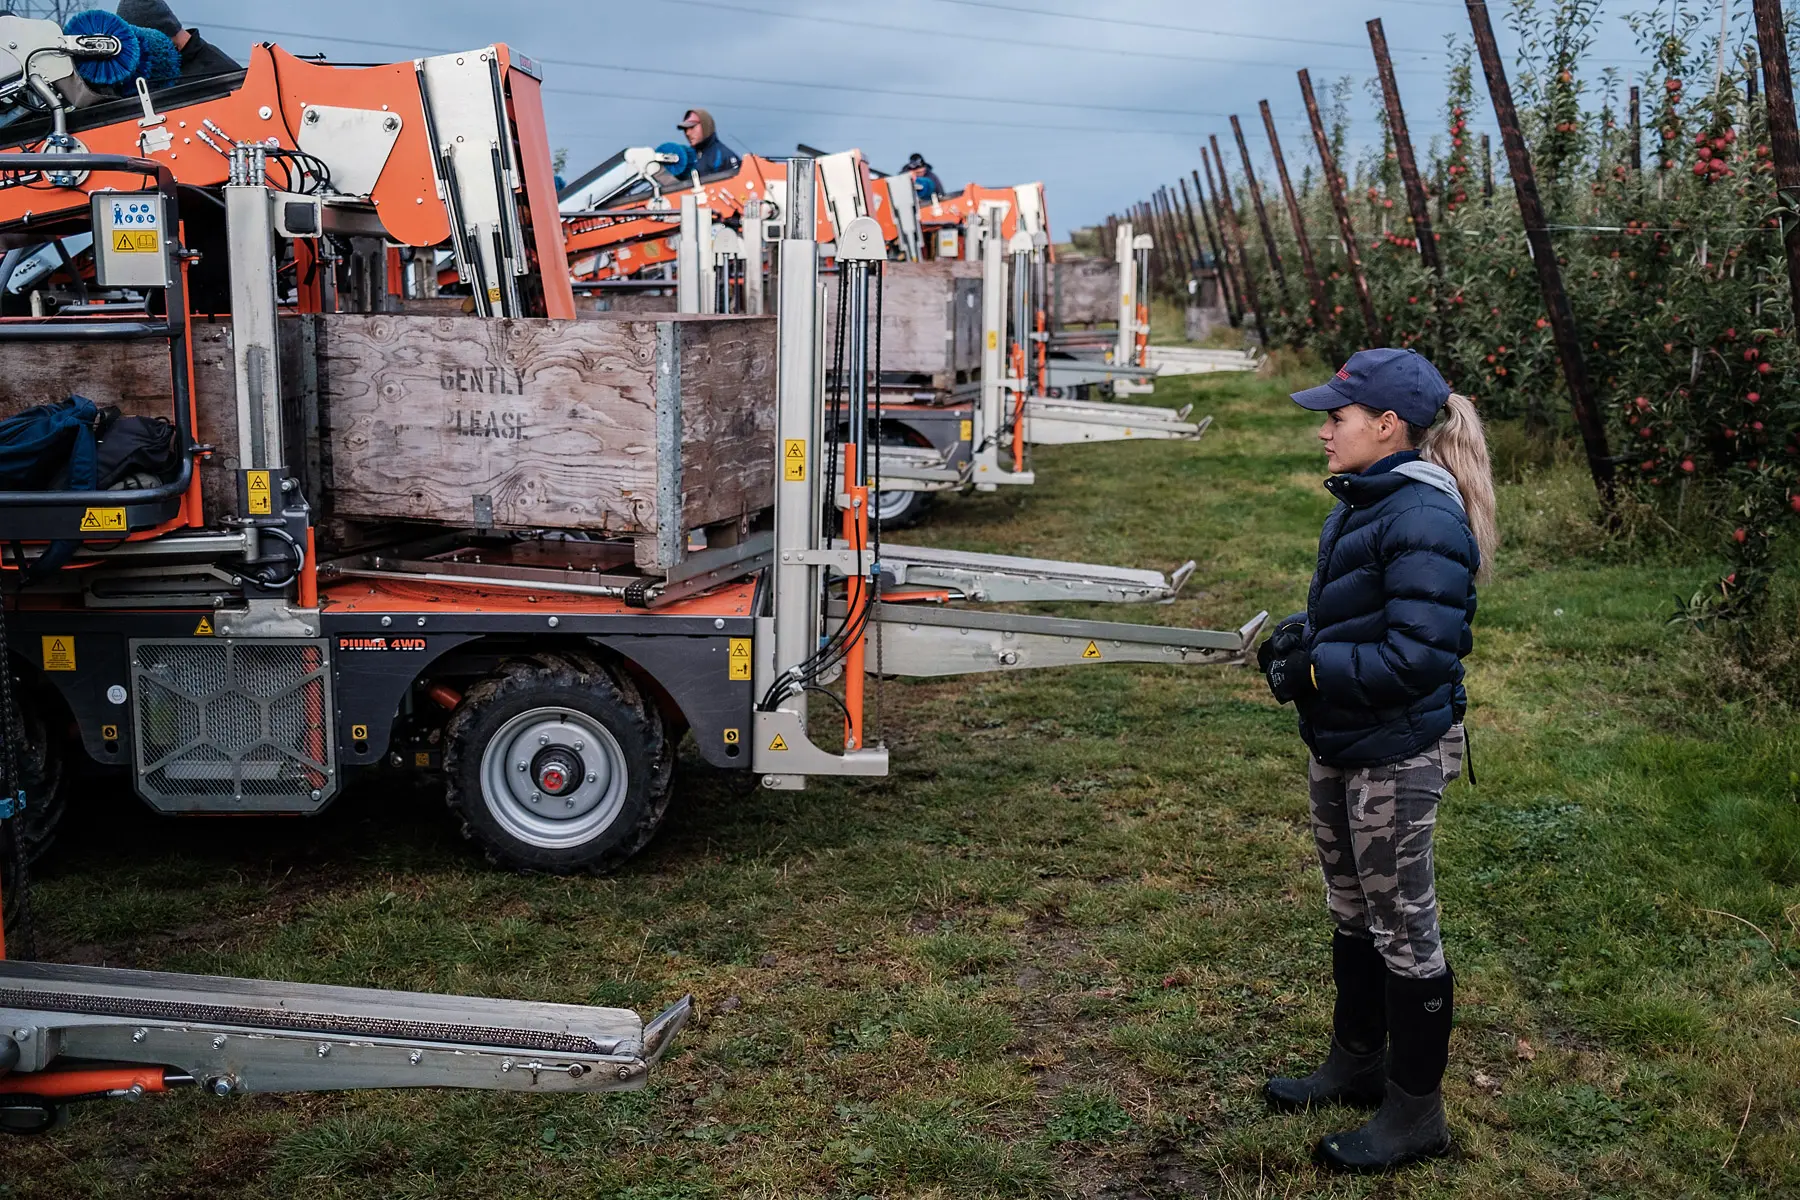 Woman examines a harvesting machine in an apple orchard